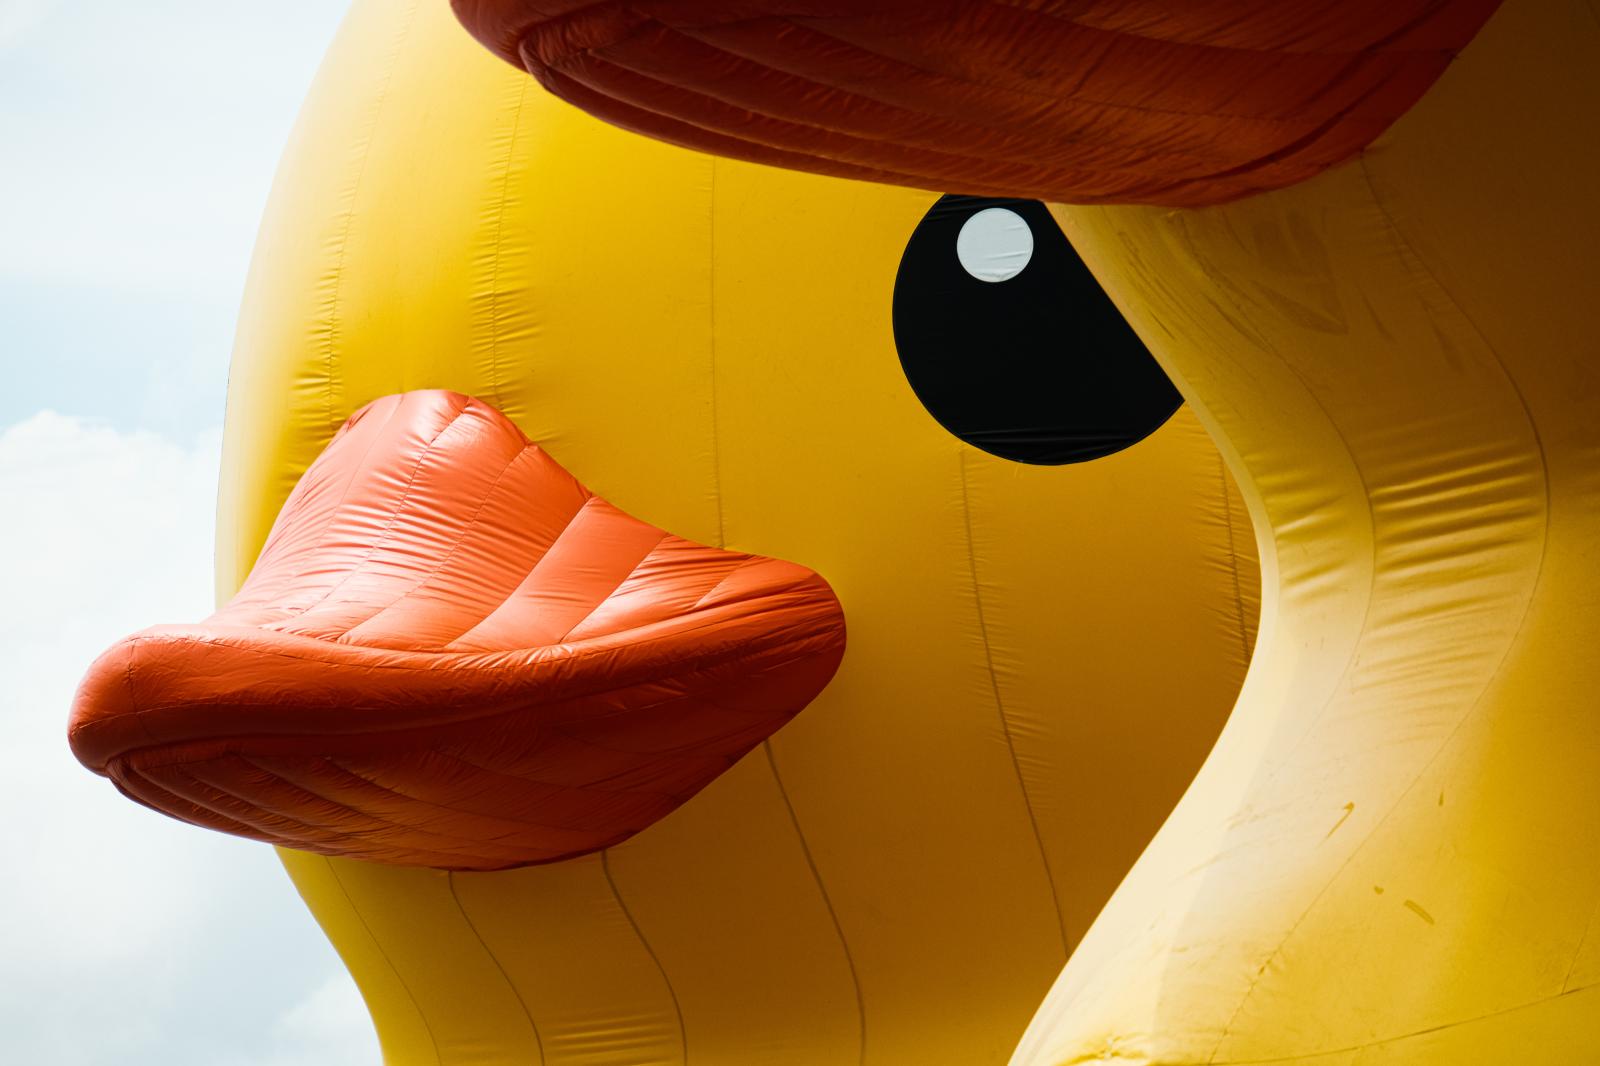 Rubber Ducks are back in Hong Kong